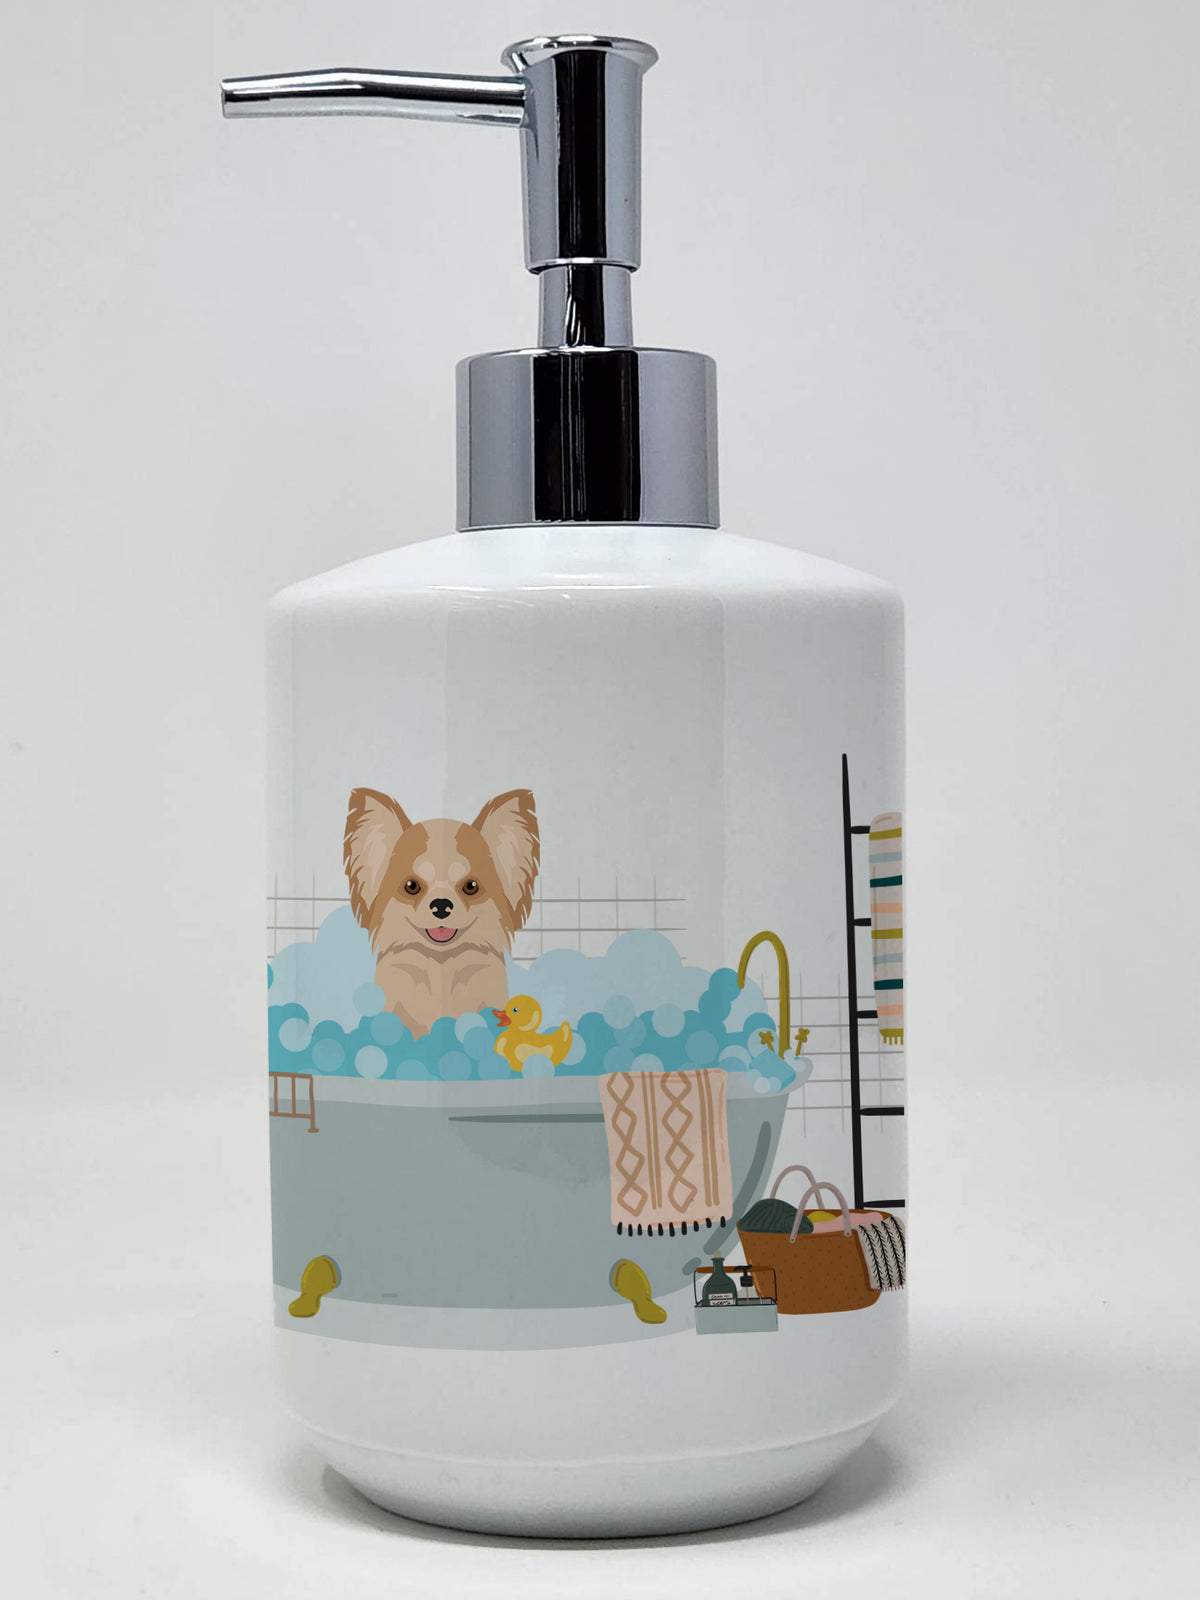 Buy this Longhaired Gold and White Chihuahua Ceramic Soap Dispenser